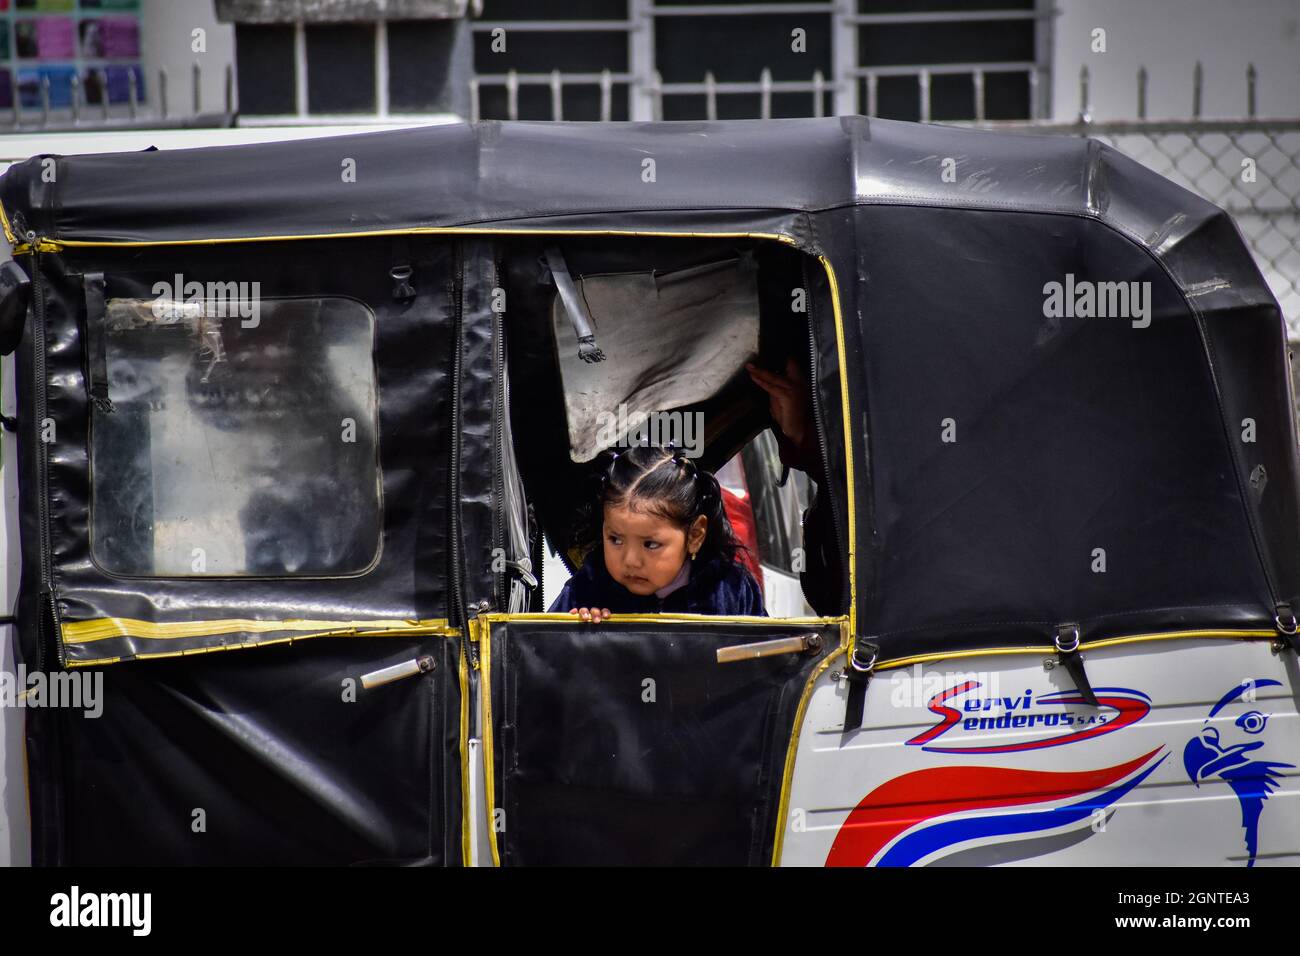 A small kid in a bike cab in Cumbal - Nariño, Colombia on August 15, 2021. Stock Photo